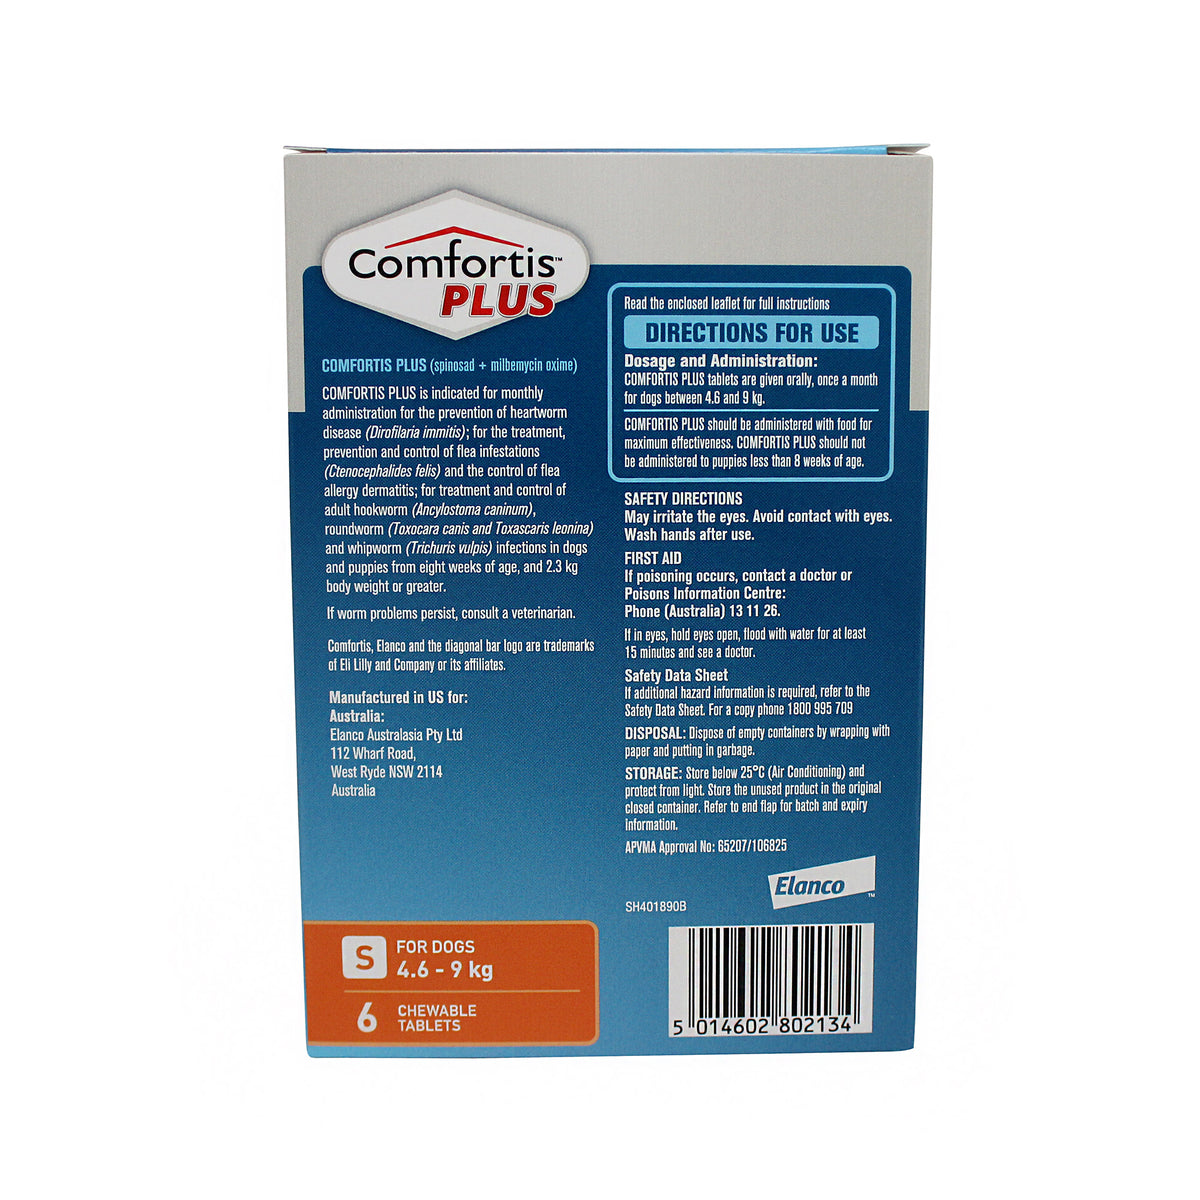 Comfortis PLUS for Small Dogs 4.6 to 9kg